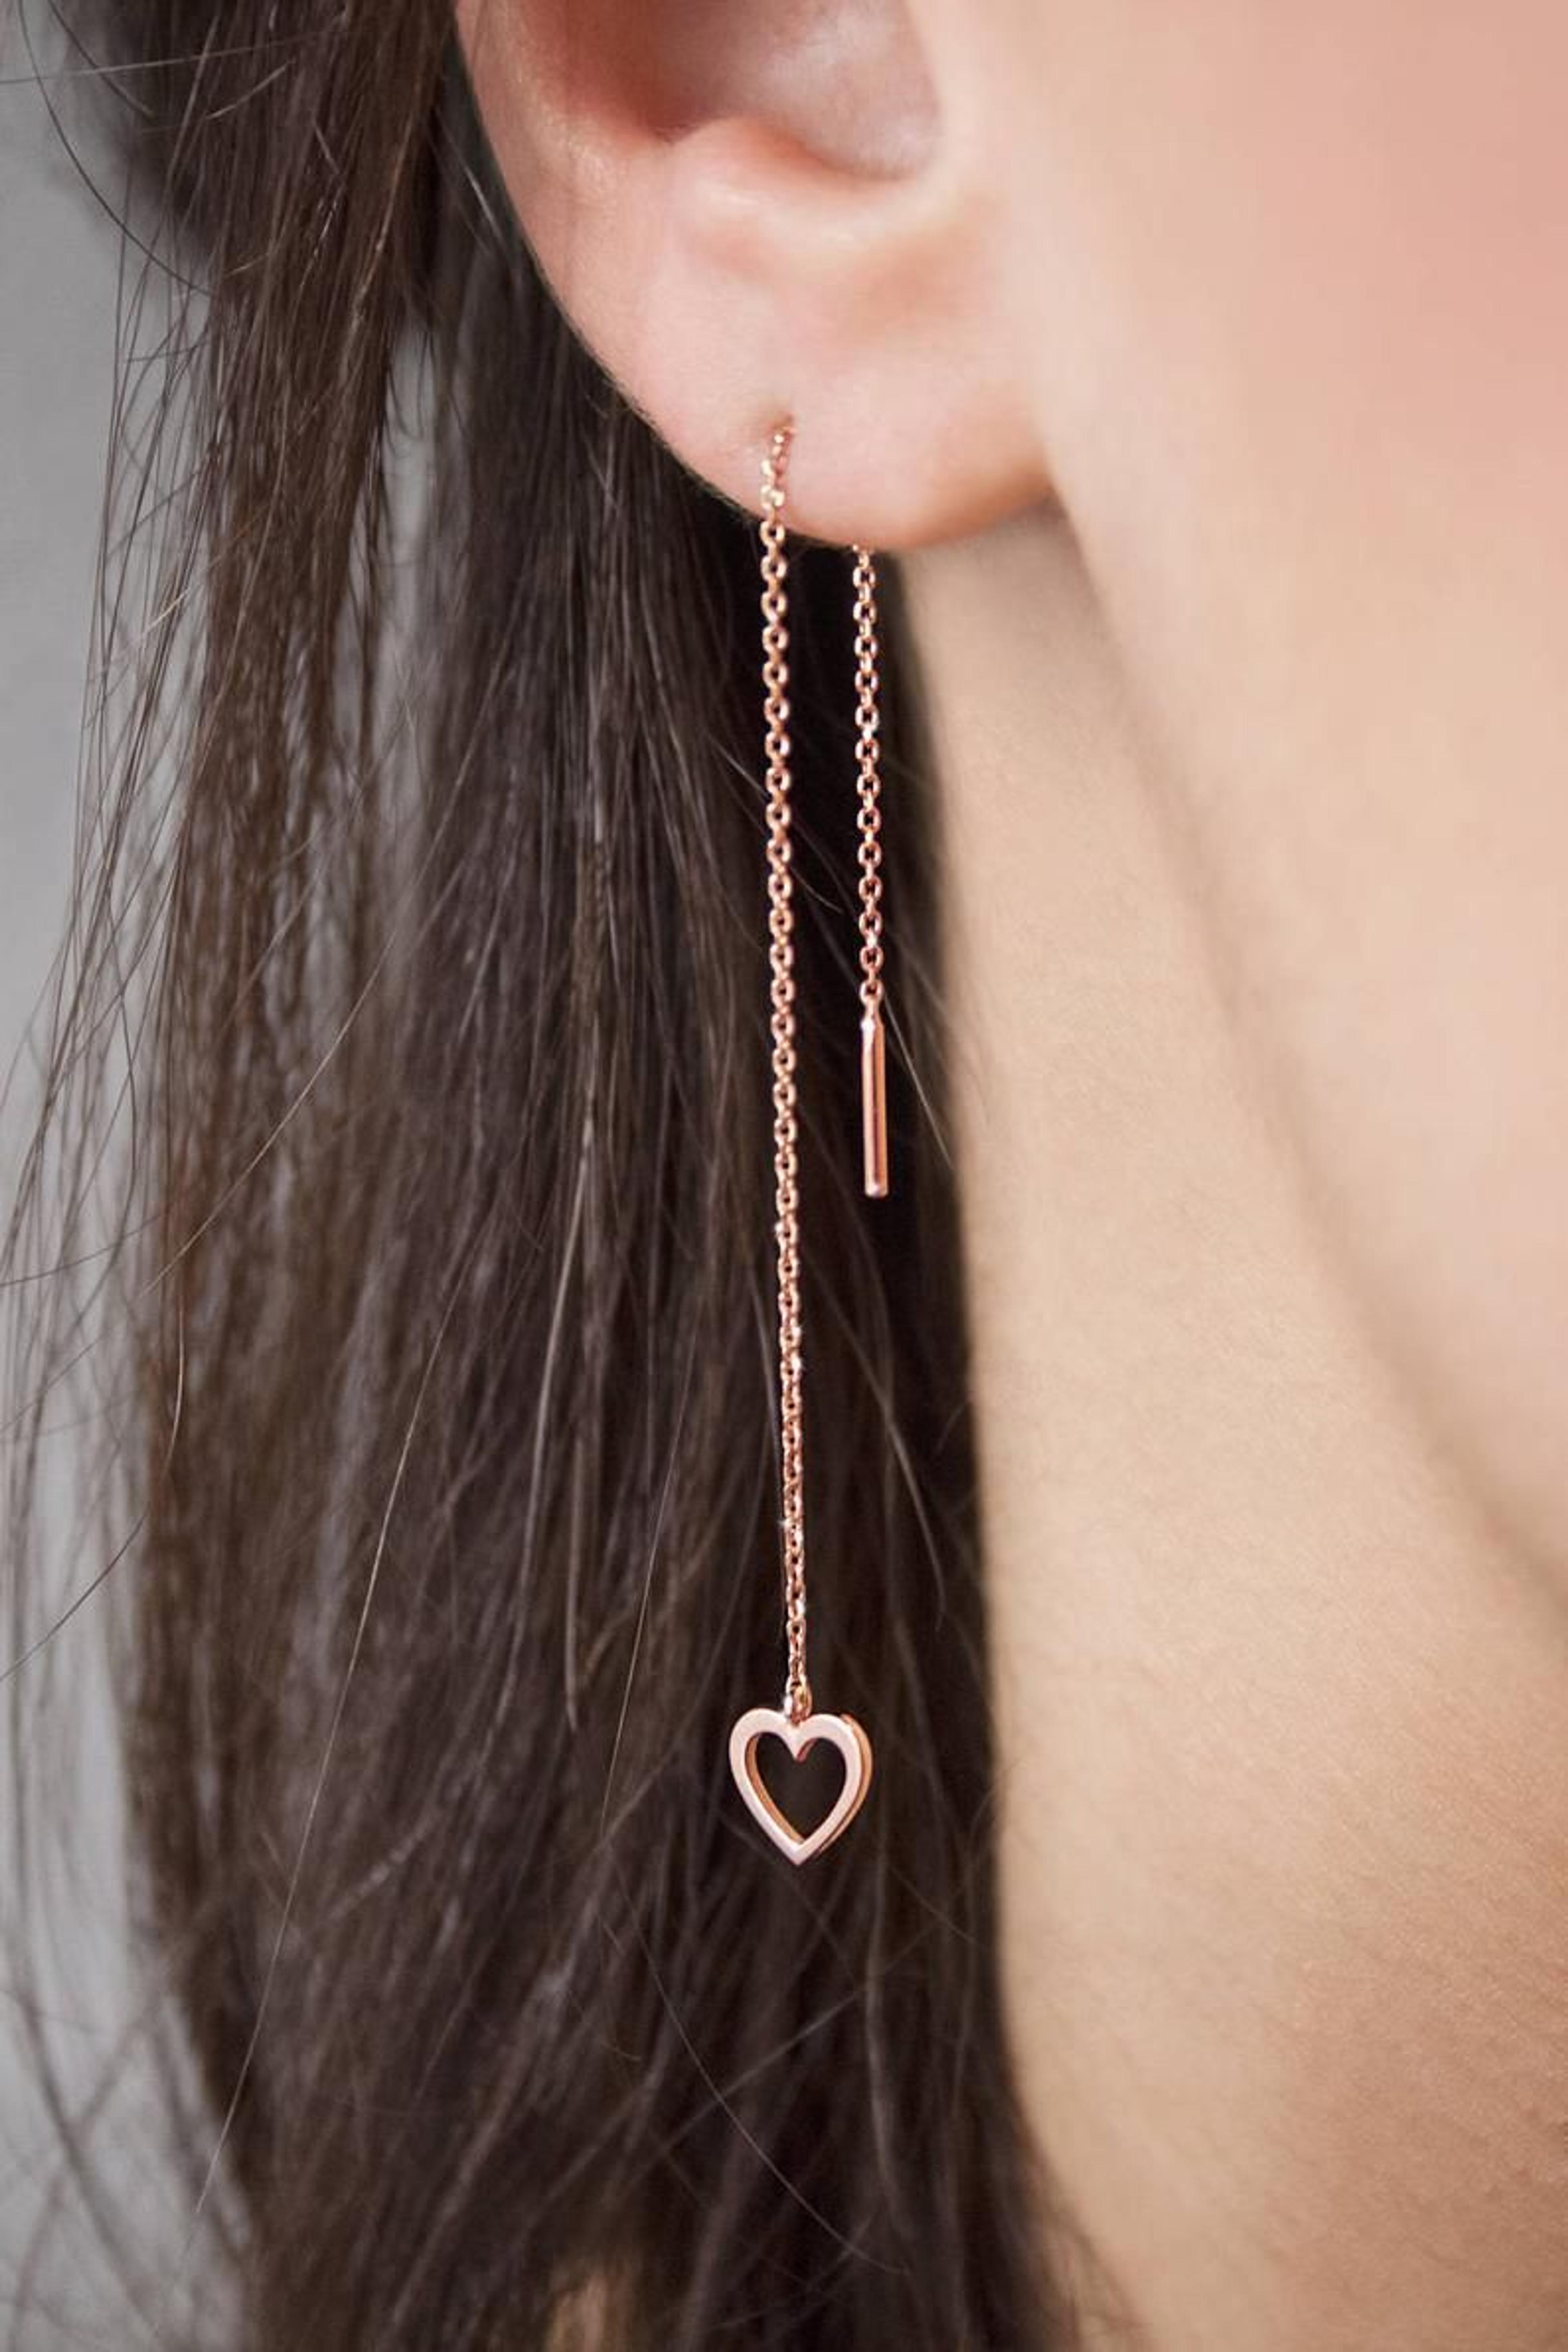 Small Hearts, Romantic Threader Earrings, 9K 14K 18K Solid Gold, Earrings in Yellow White or Rose Gold, Long Chain Threaders, Gift For Her